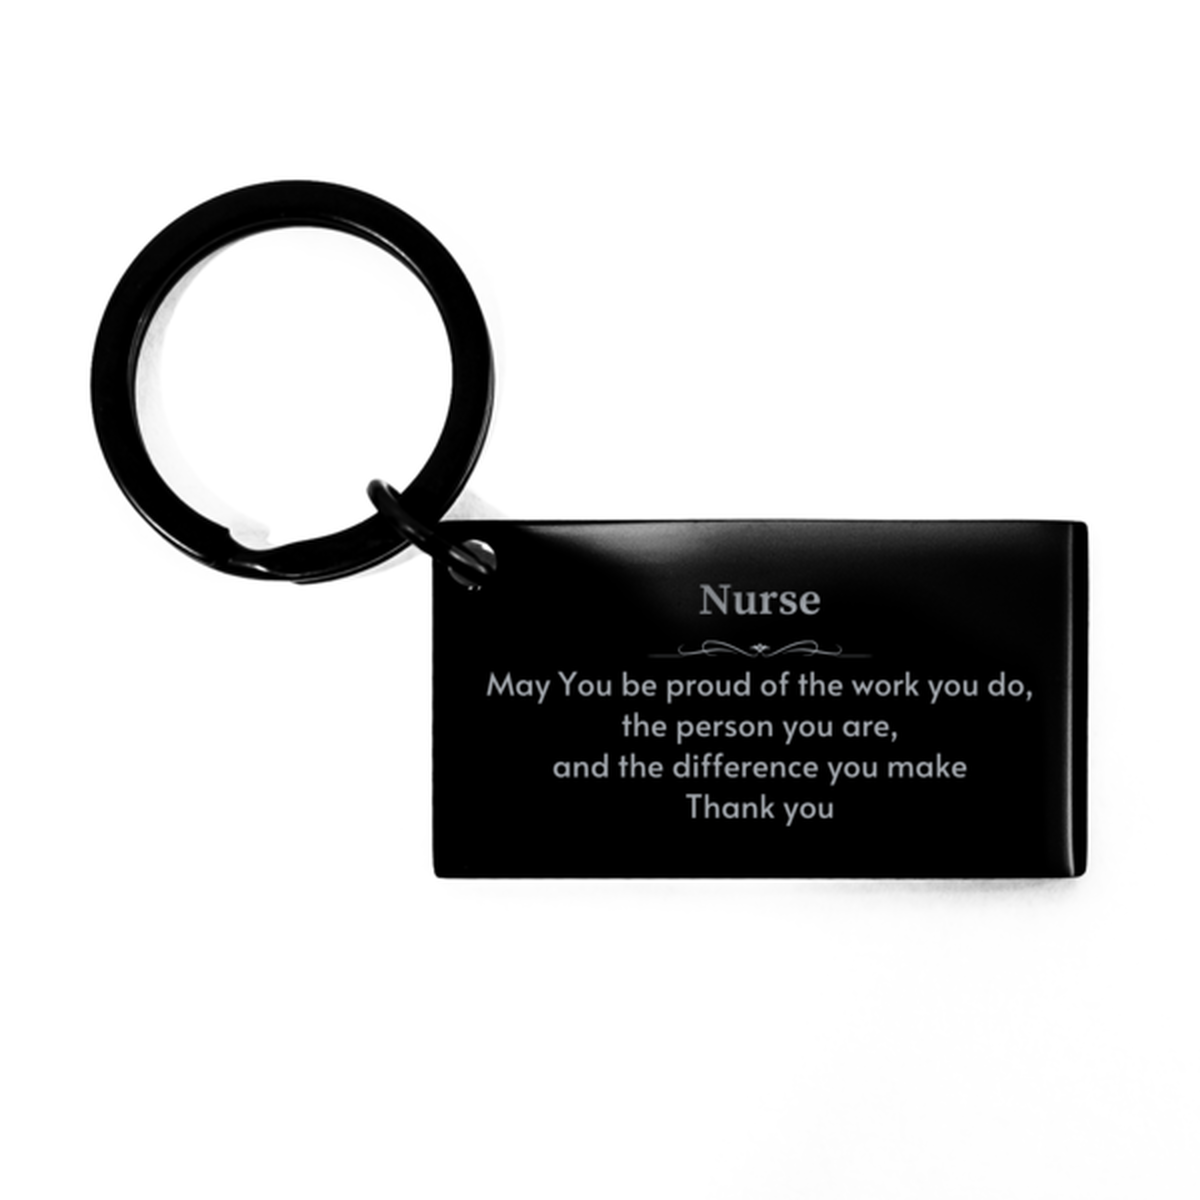 Heartwarming Keychain Retirement Coworkers Gifts for Nurse, Personal Care Aide May You be proud of the work you do, the person you are Gifts for Boss Men Women Friends